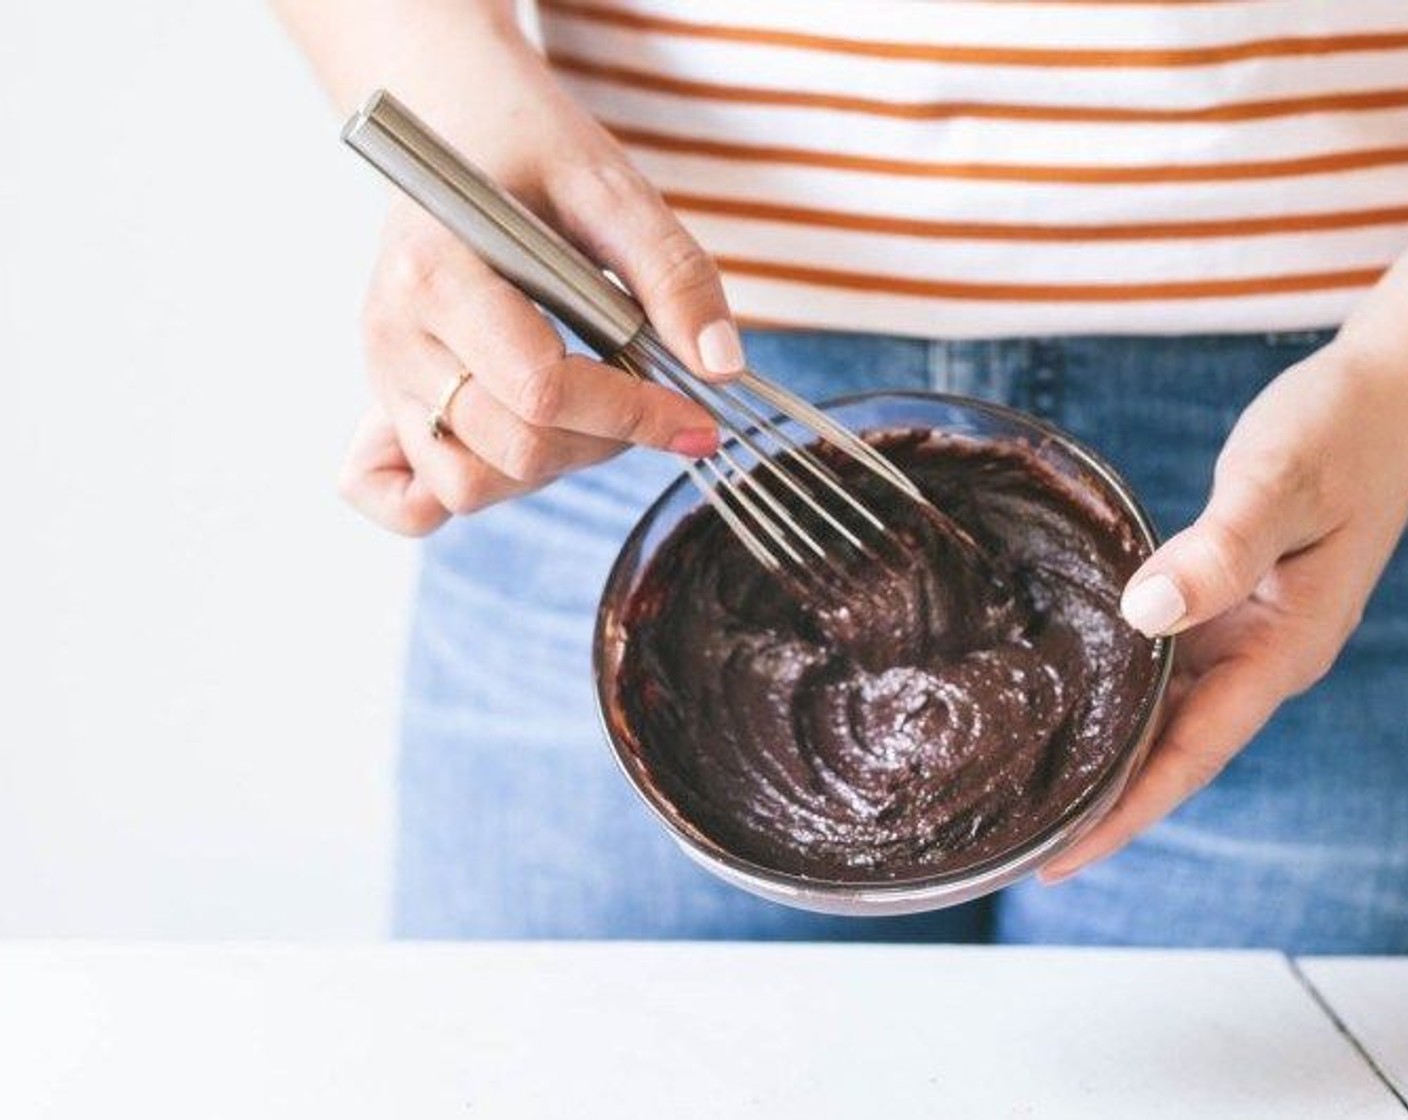 step 1 In a small bowl, whisk together Unsweetened Cocoa Powder (1/4 cup), Coconut Oil (1/4 cup), and Honey (2 Tbsp) until combined. Set aside.